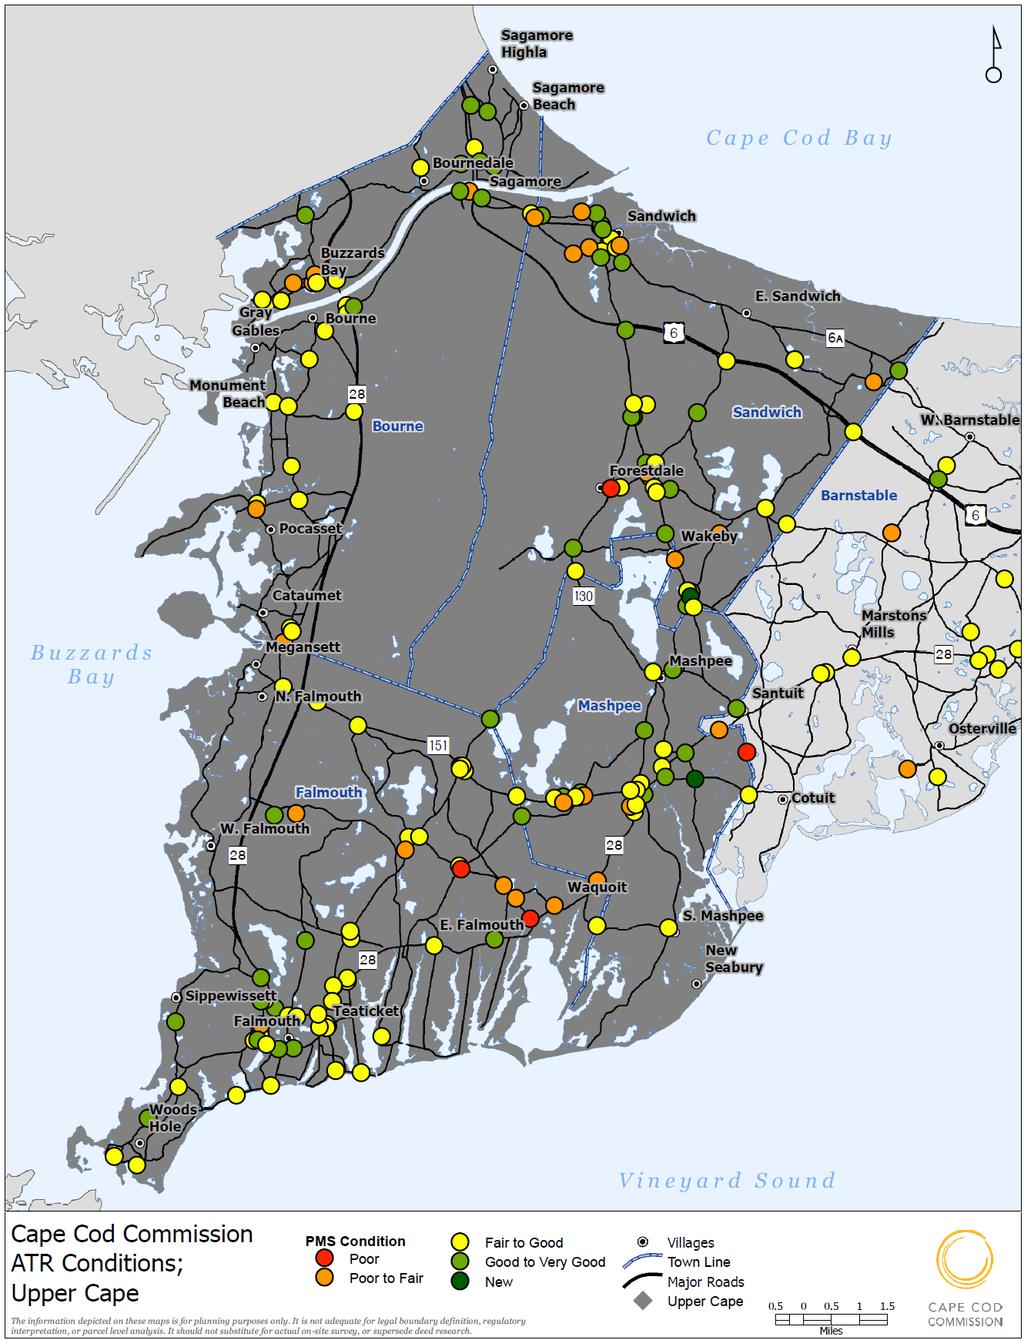 FIGURE 9-2011-2014 PAVEMENT CONDITIONS AT ATR LOCATIONS: UPPER CAPE